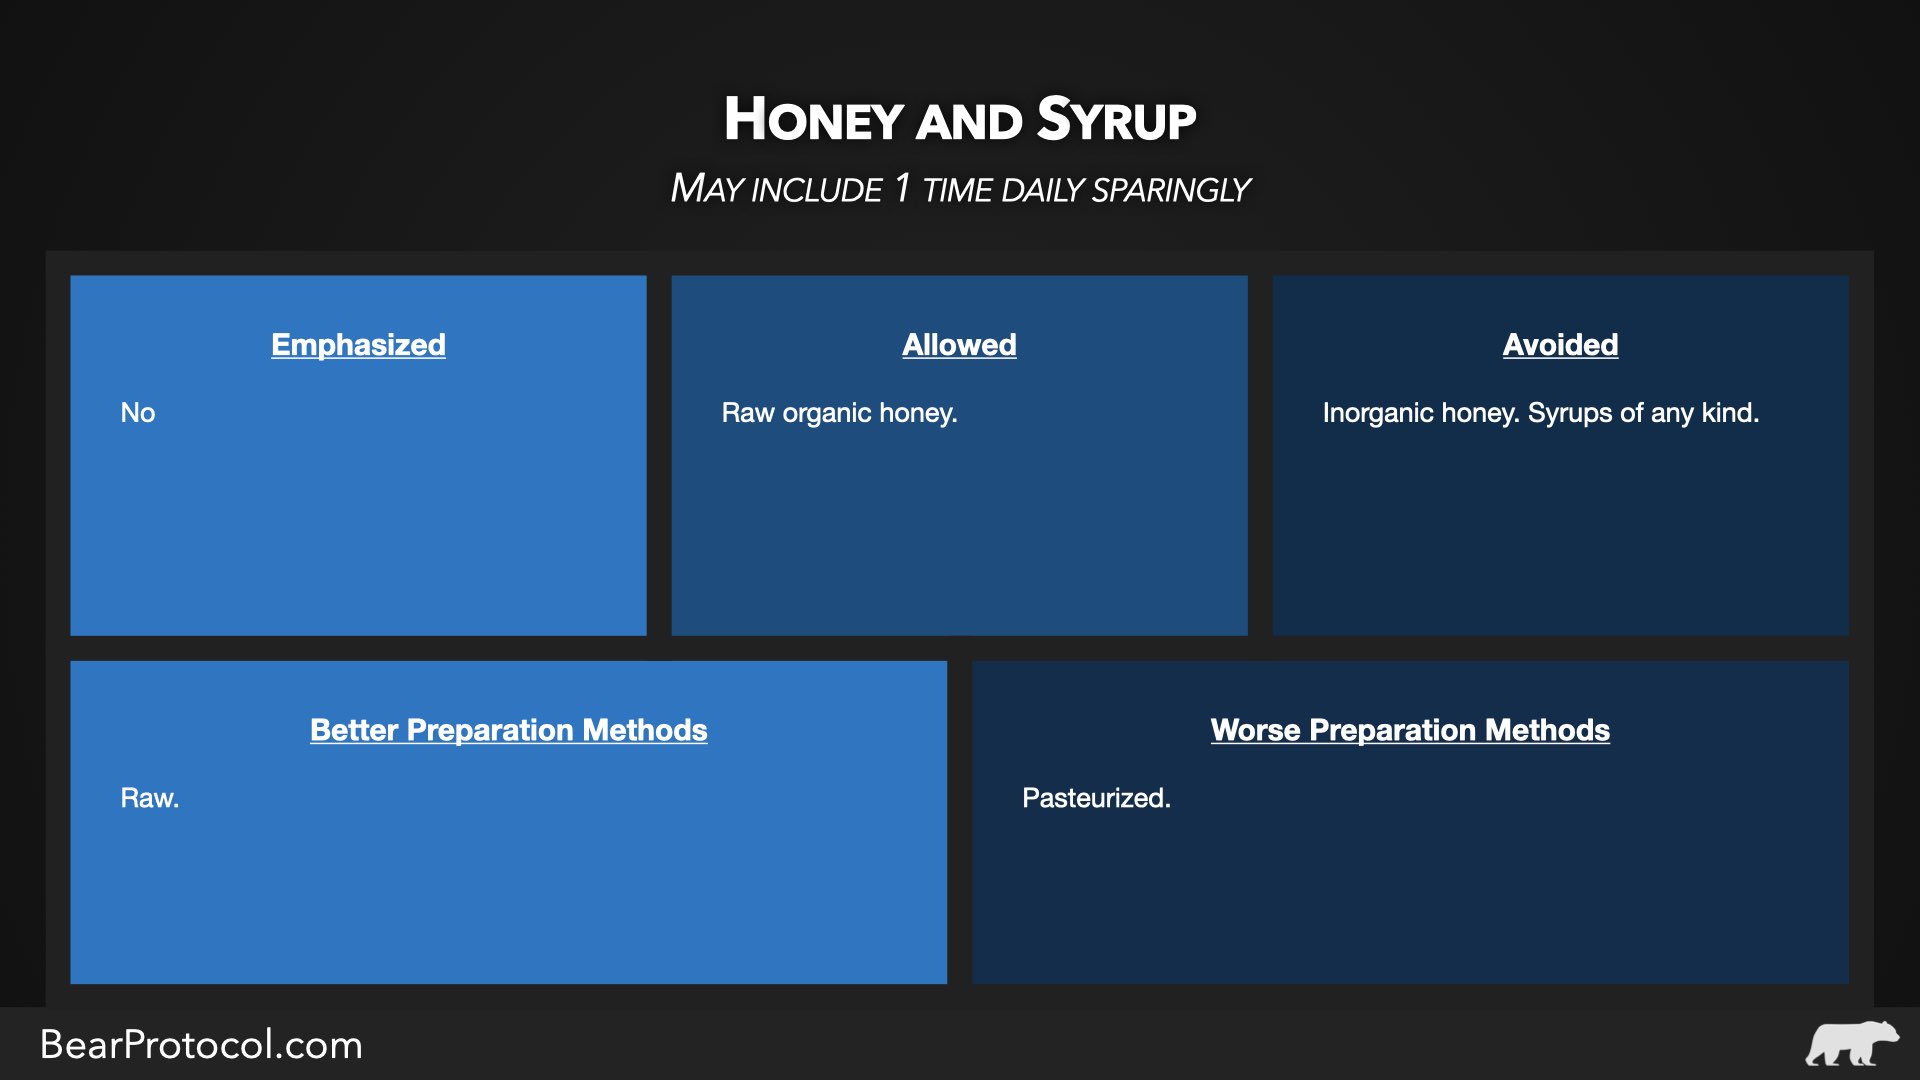 Honey and syrups